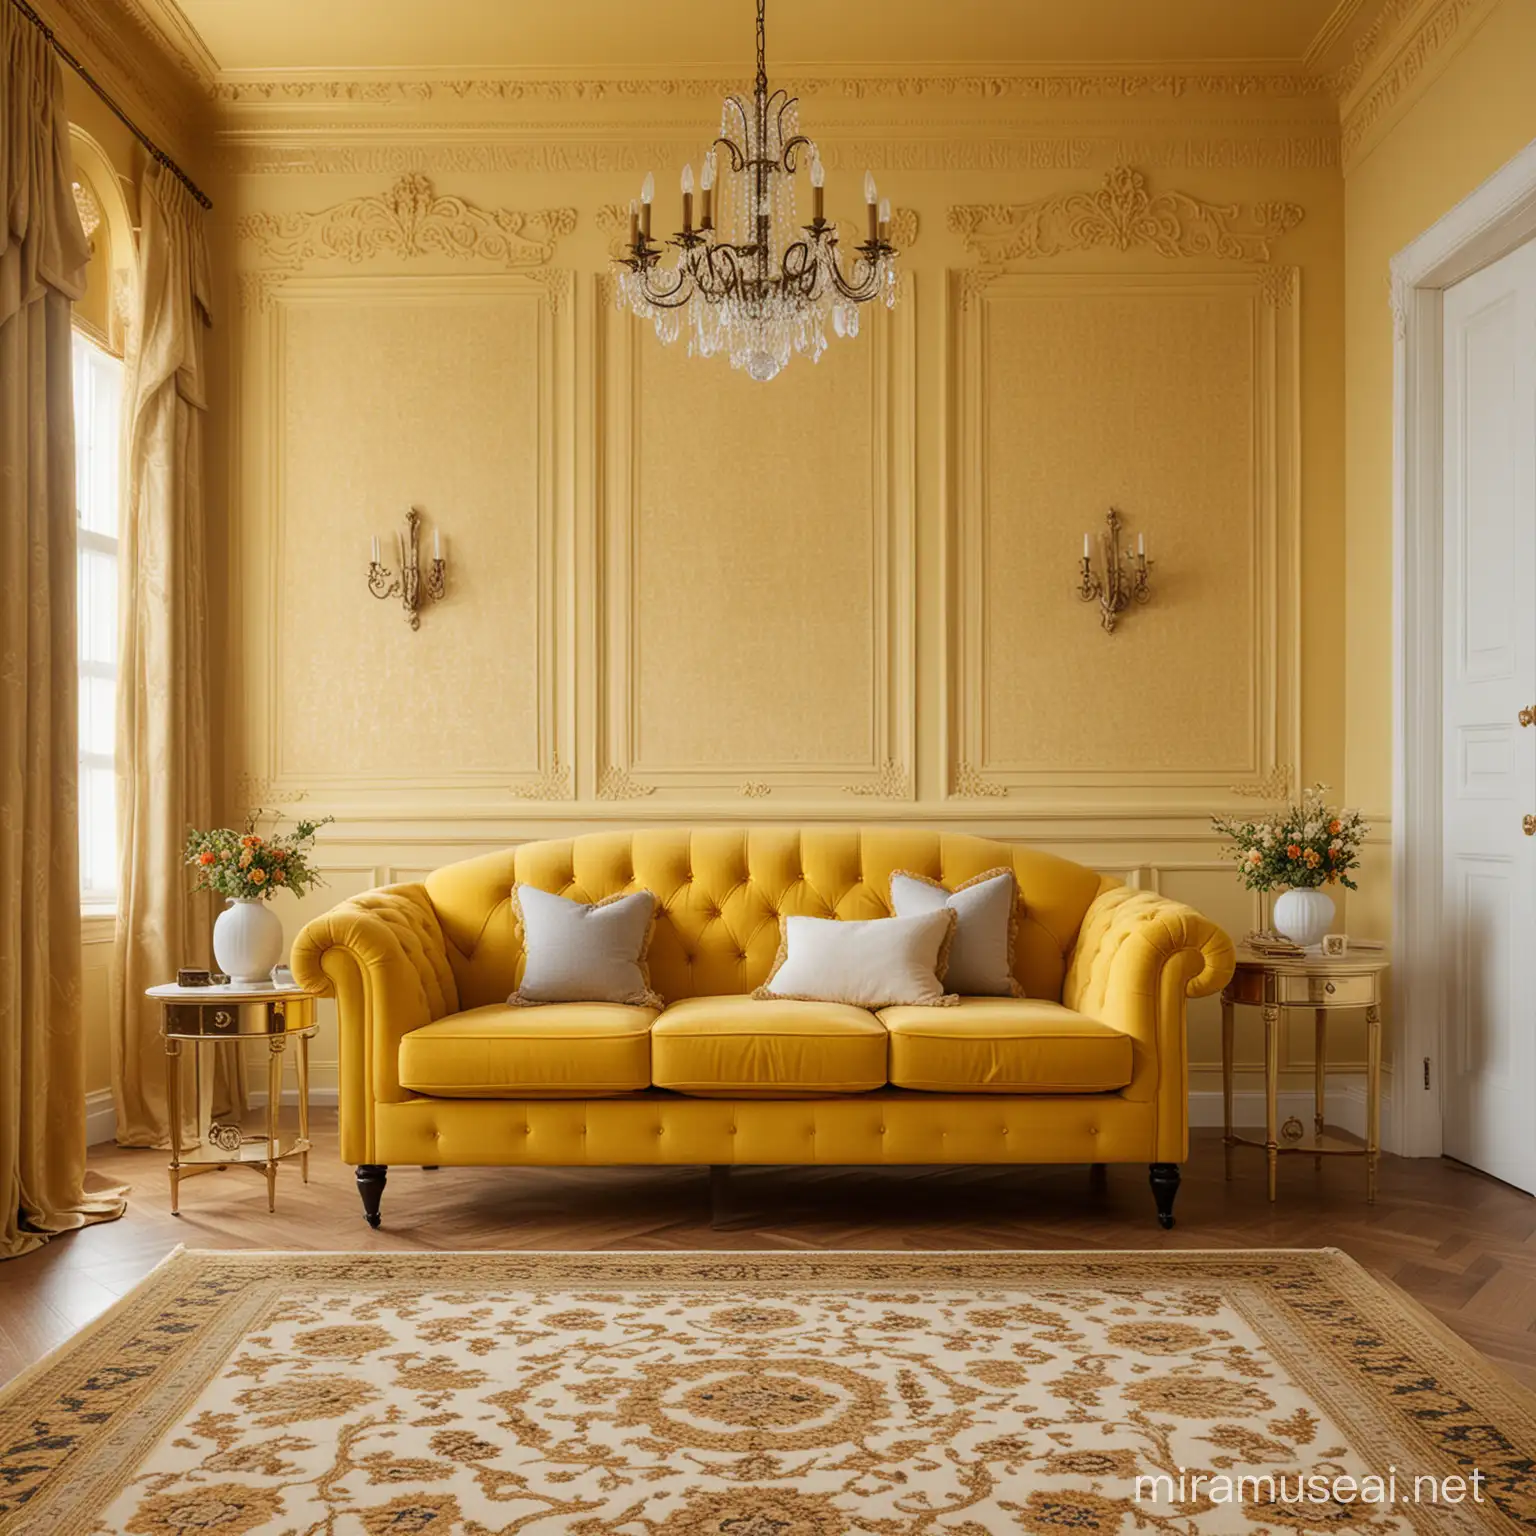 Luxurious Living Room with Plush Sofa and Intricate Dcor